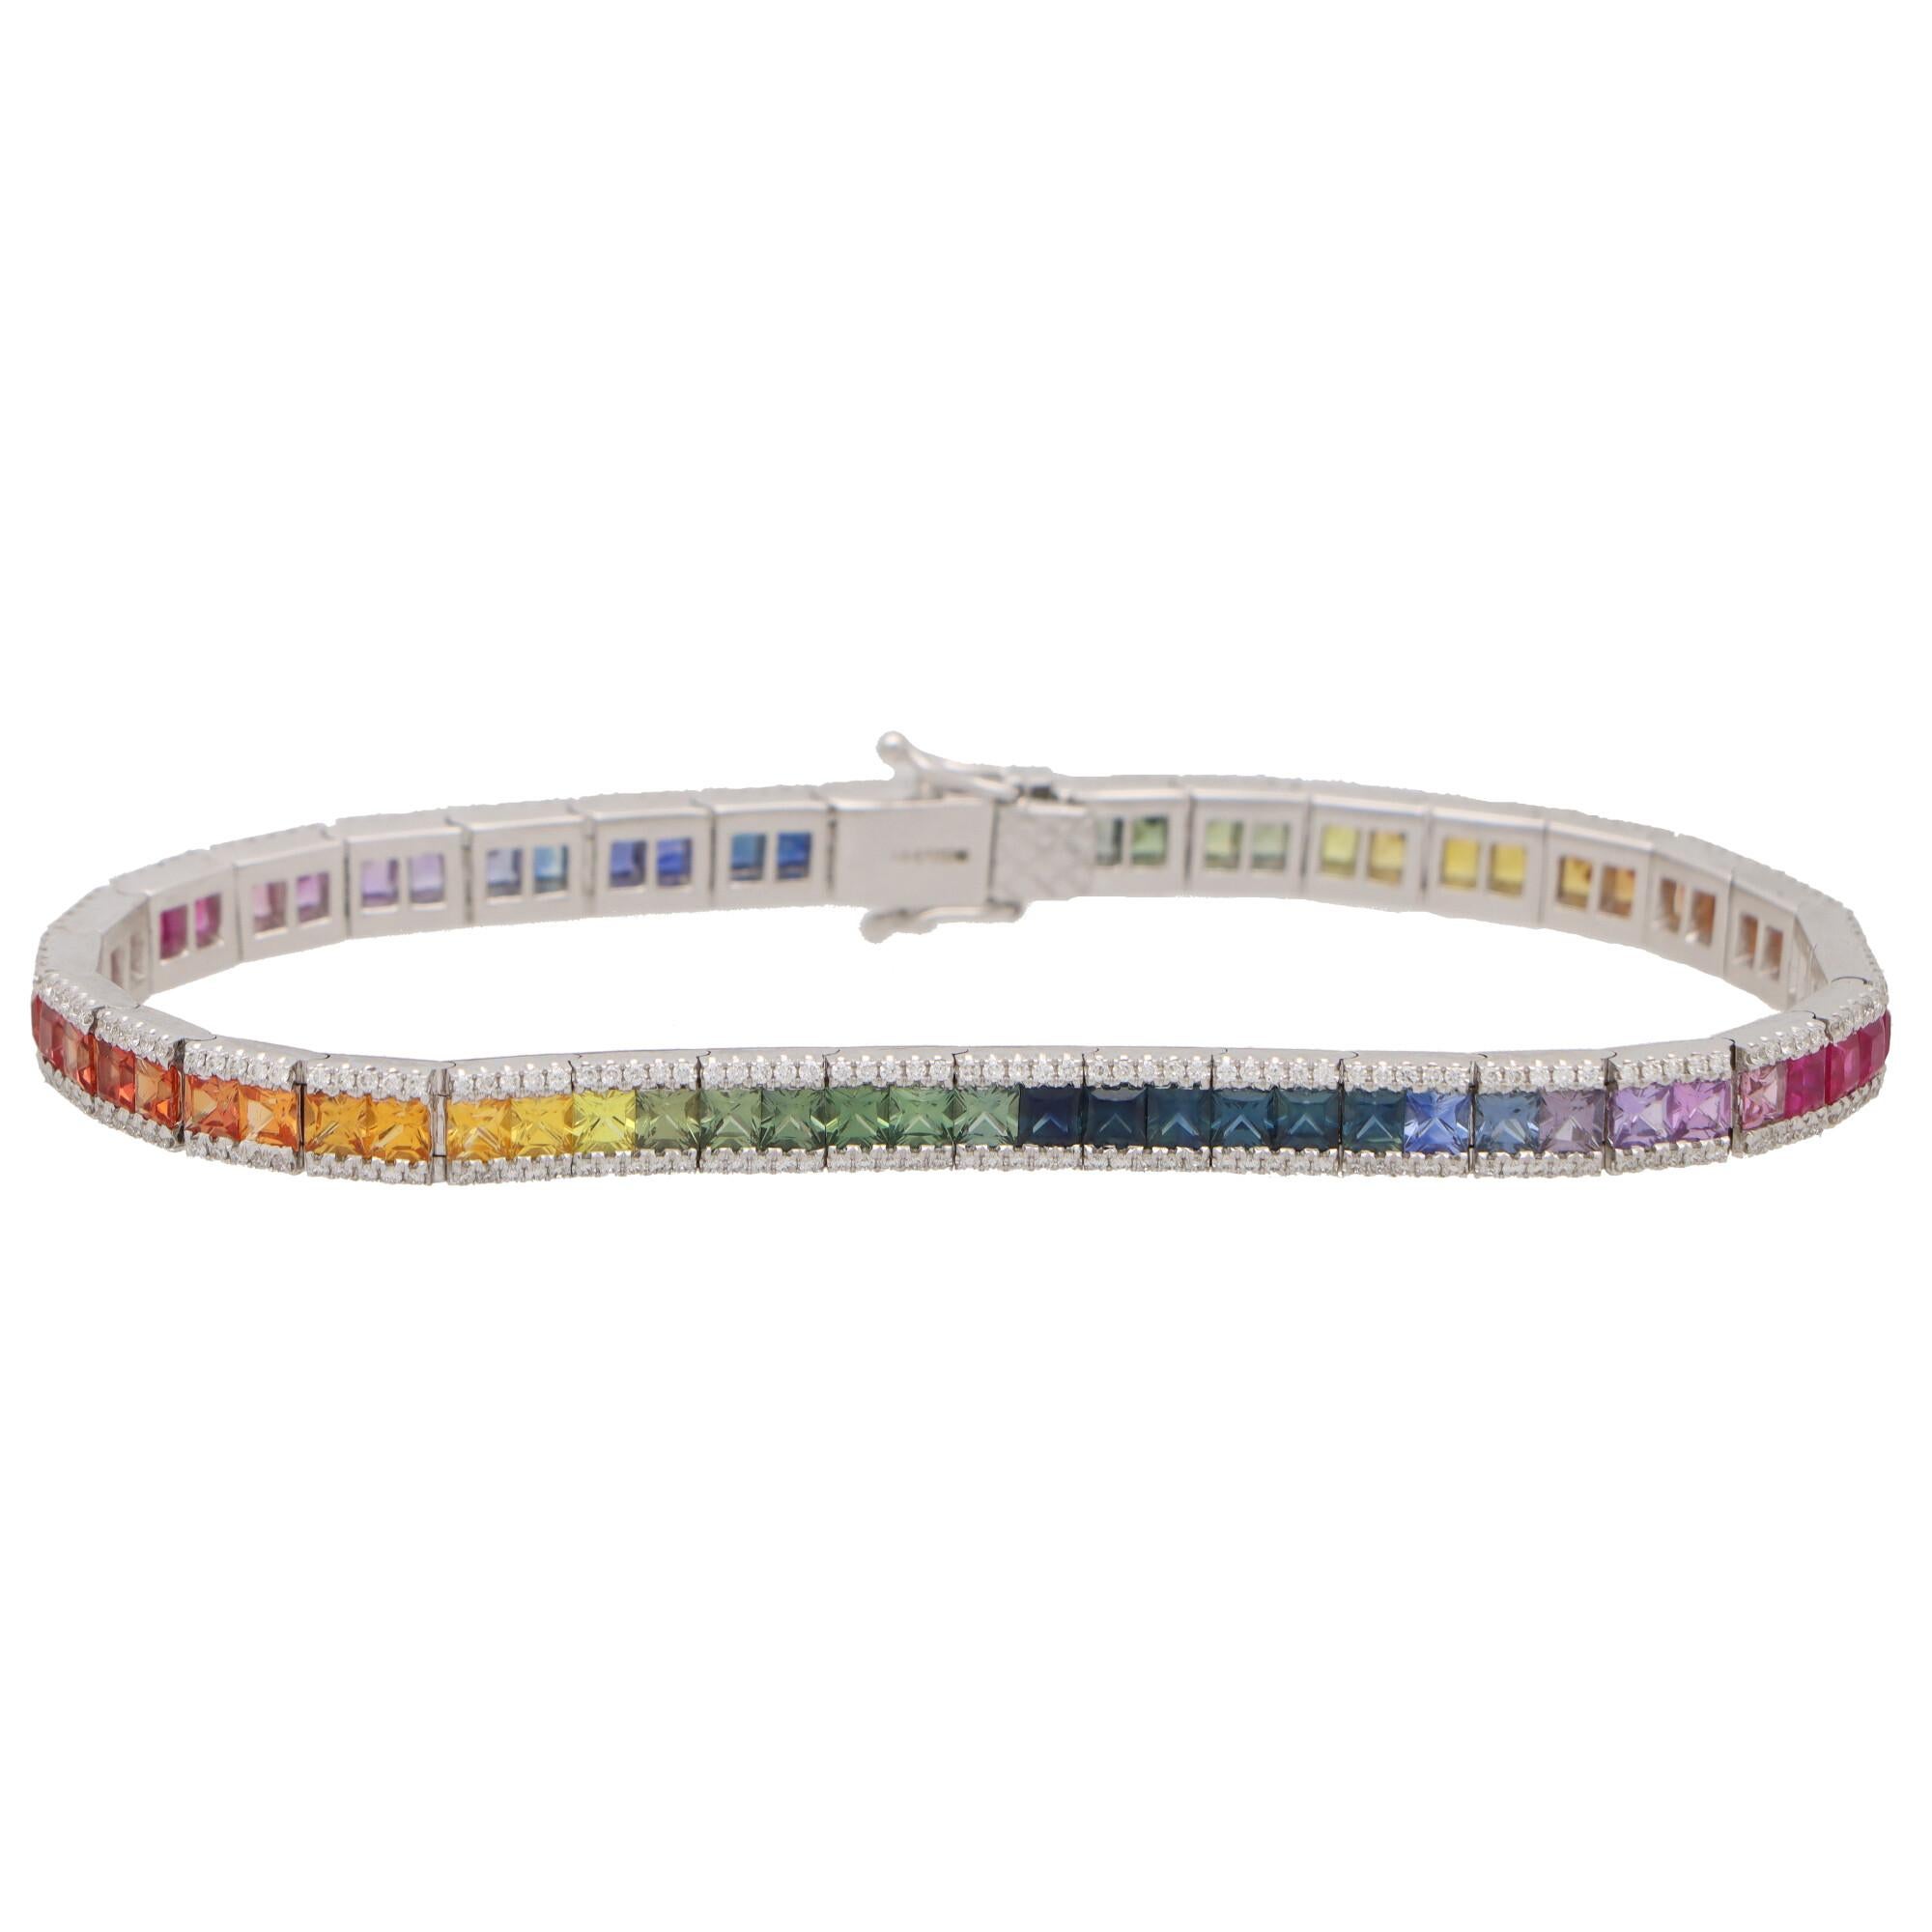  An extremely beautiful diamond and rainbow sapphire line bracelet set in 18k white gold. 

The bracelet is composed of exactly 70 princess-cut sapphires all varying in tone and colour. Within the bracelet we see a beautiful rainbow effect and the